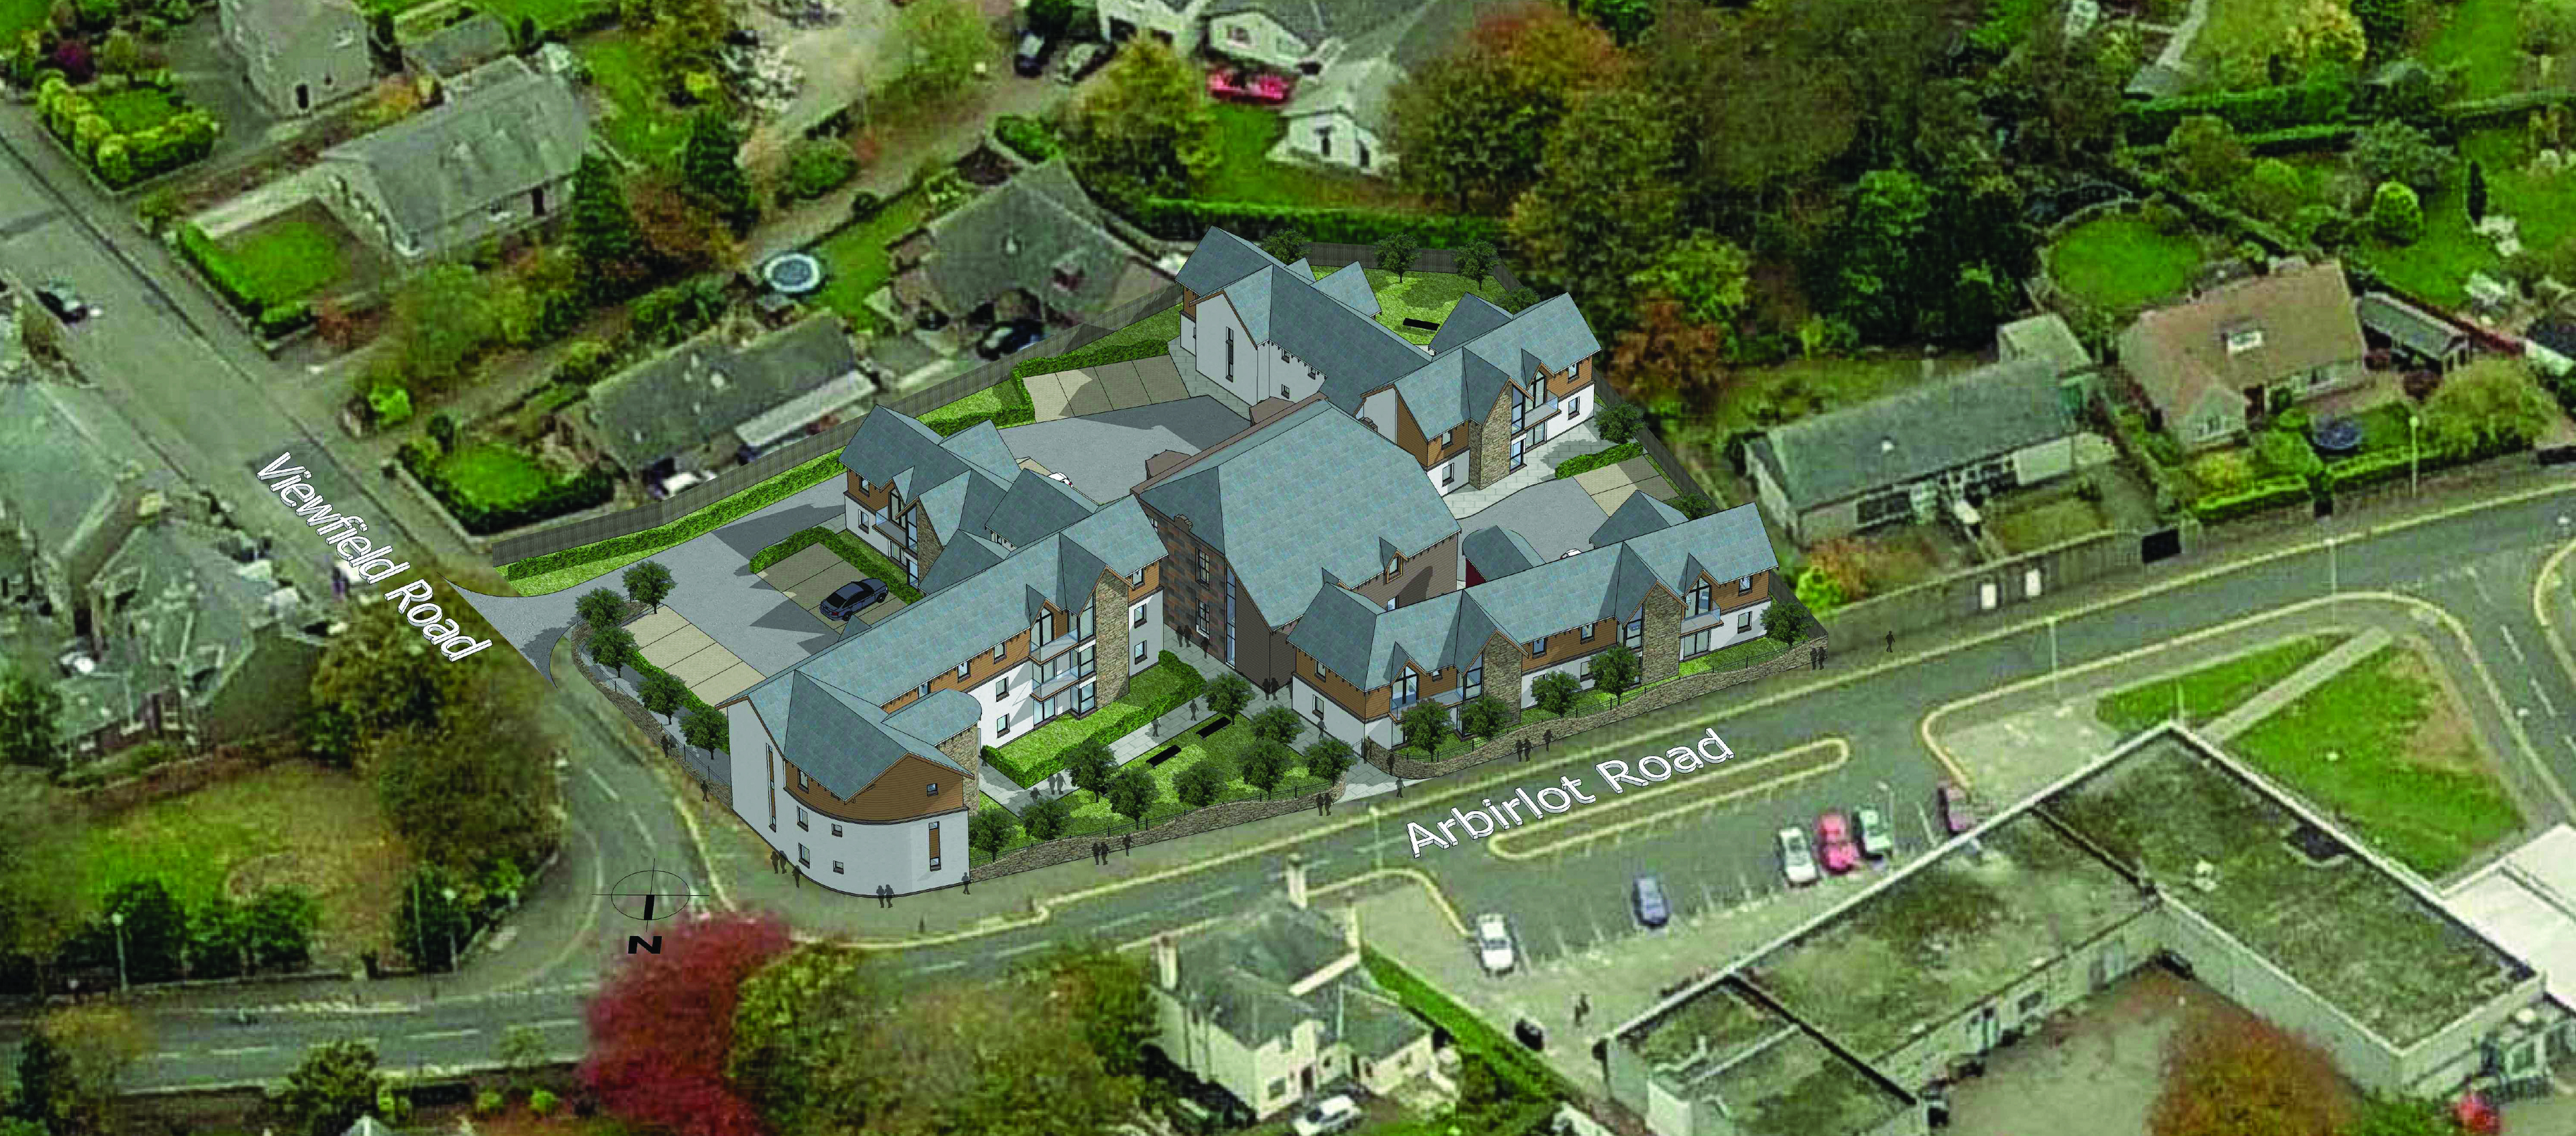 Viewfield Hotel development in Arbroath: A 3D image of how the site will look when the work is completed.